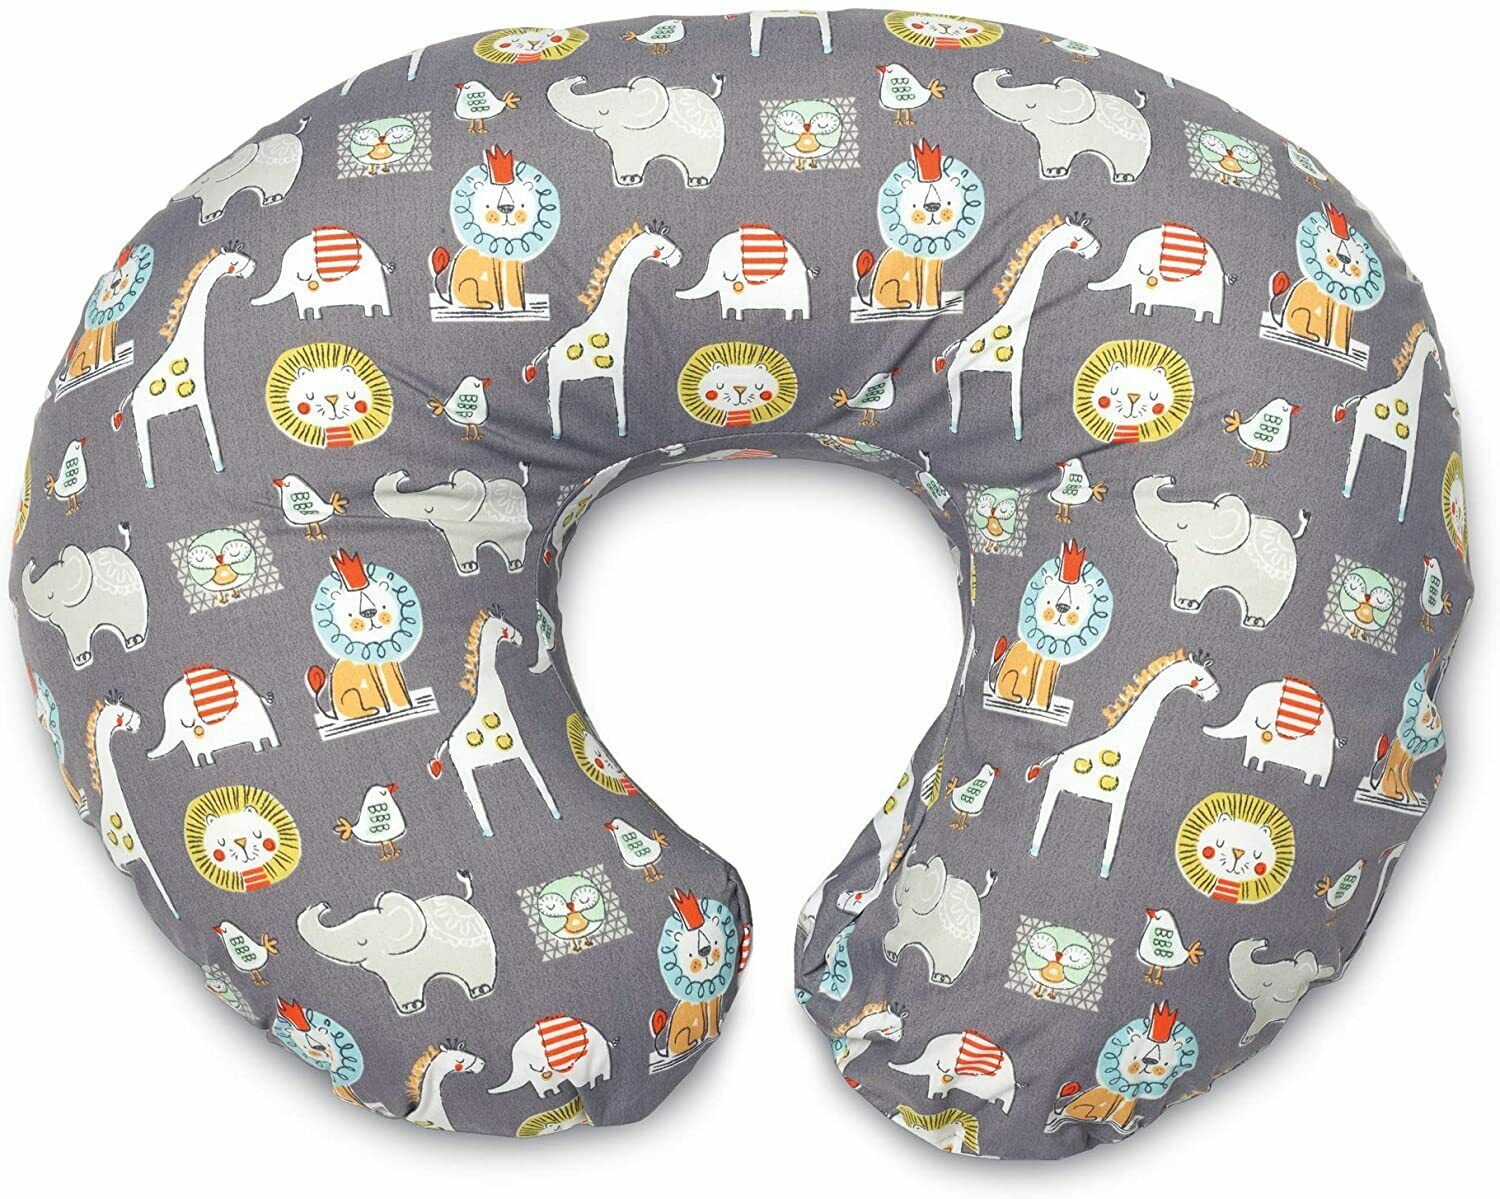 Boppy Original Feeding And Infant Support Pillow, 0-12m Tummy Time, Sitting